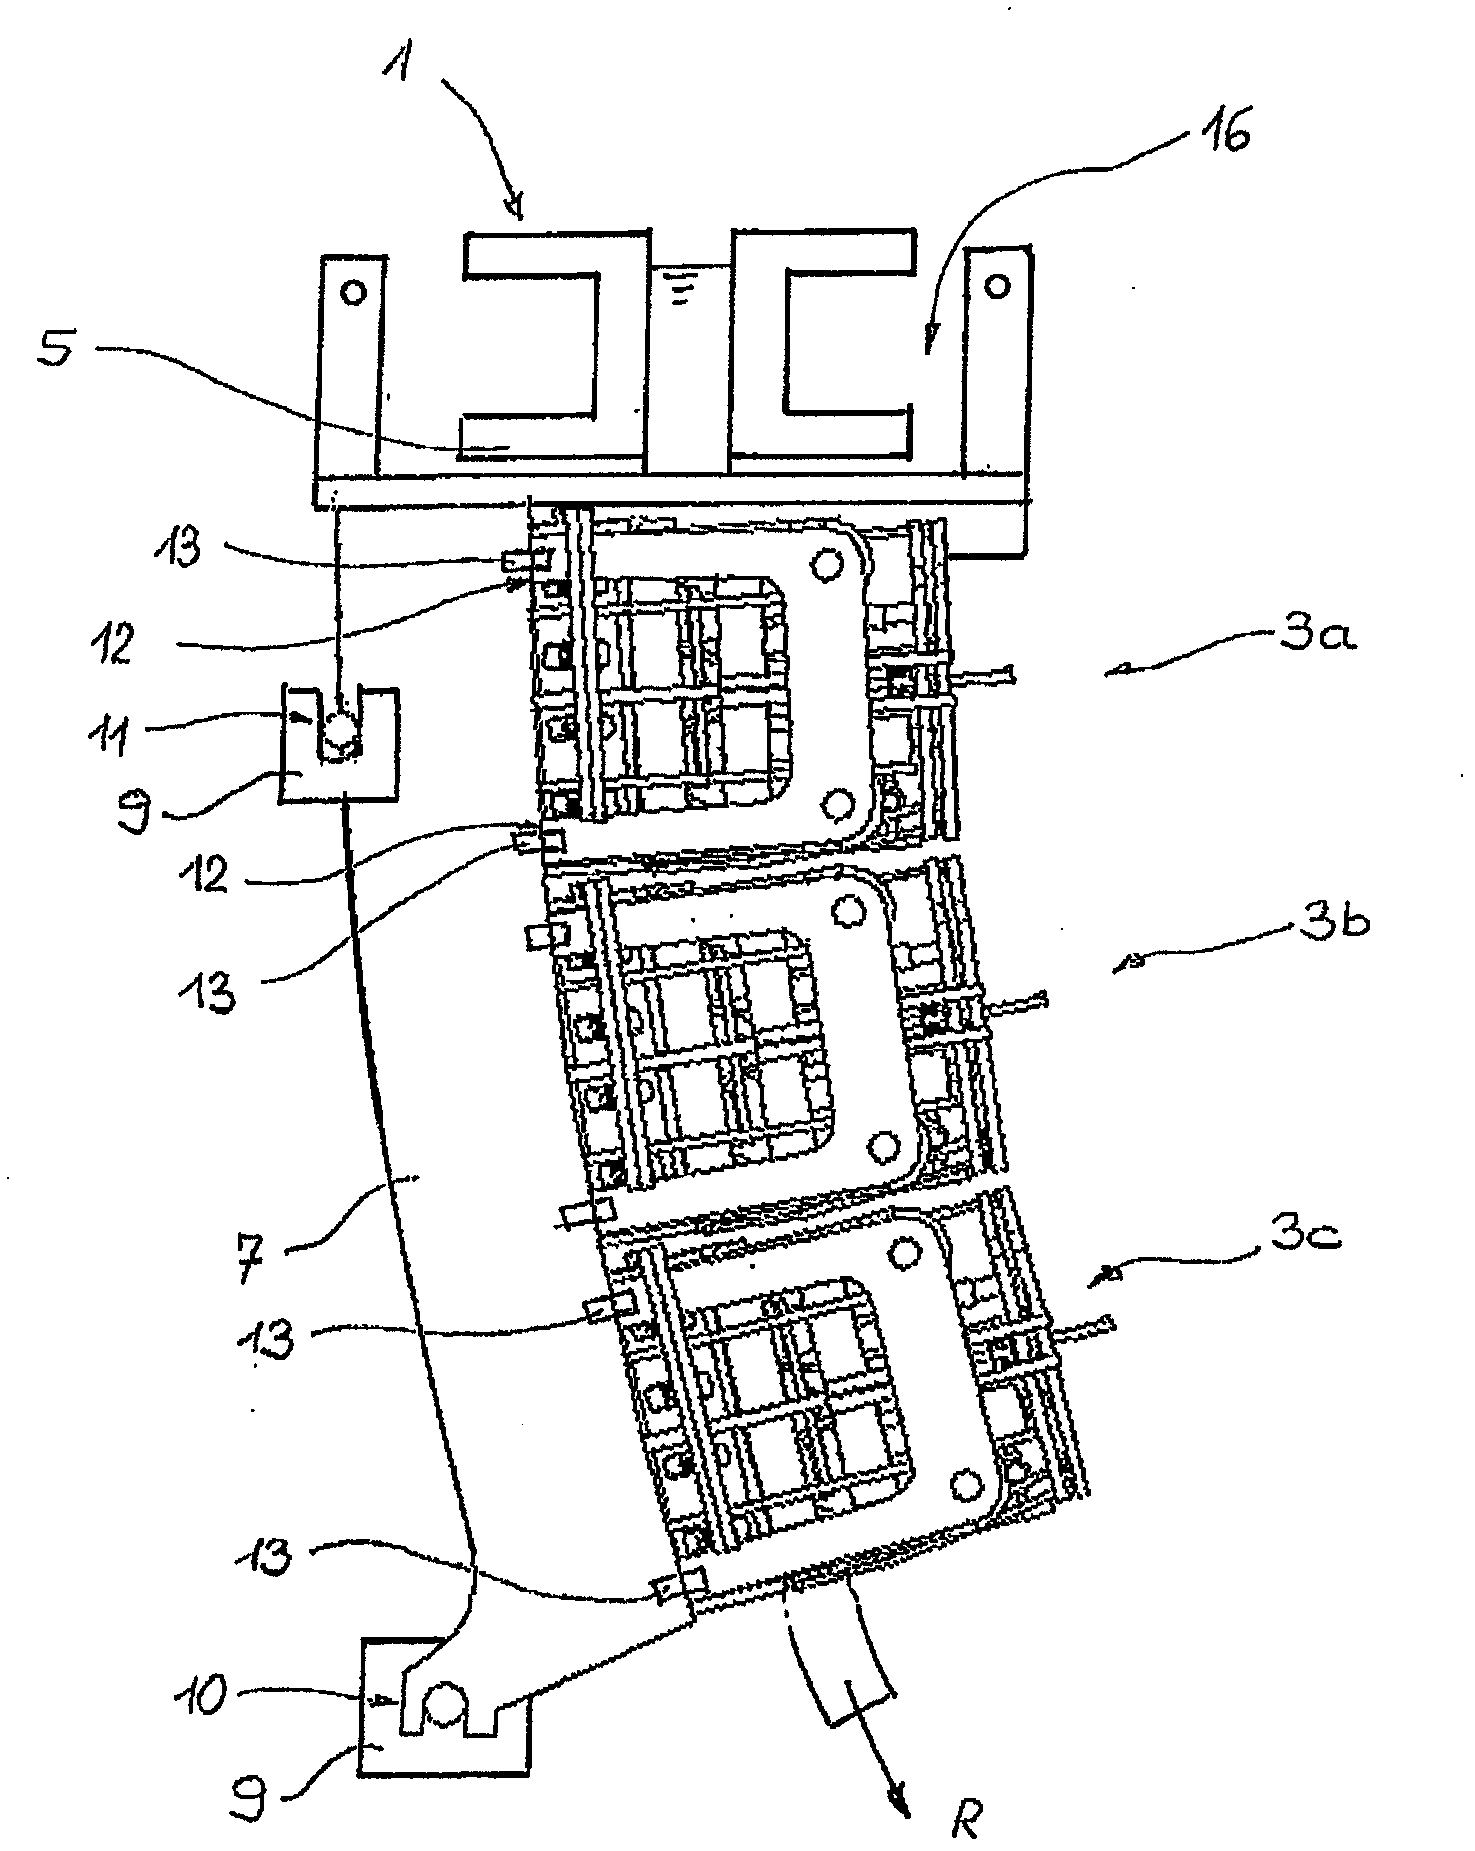 Continuous casting system for casting a metal strand having a billet or bloom cross-section